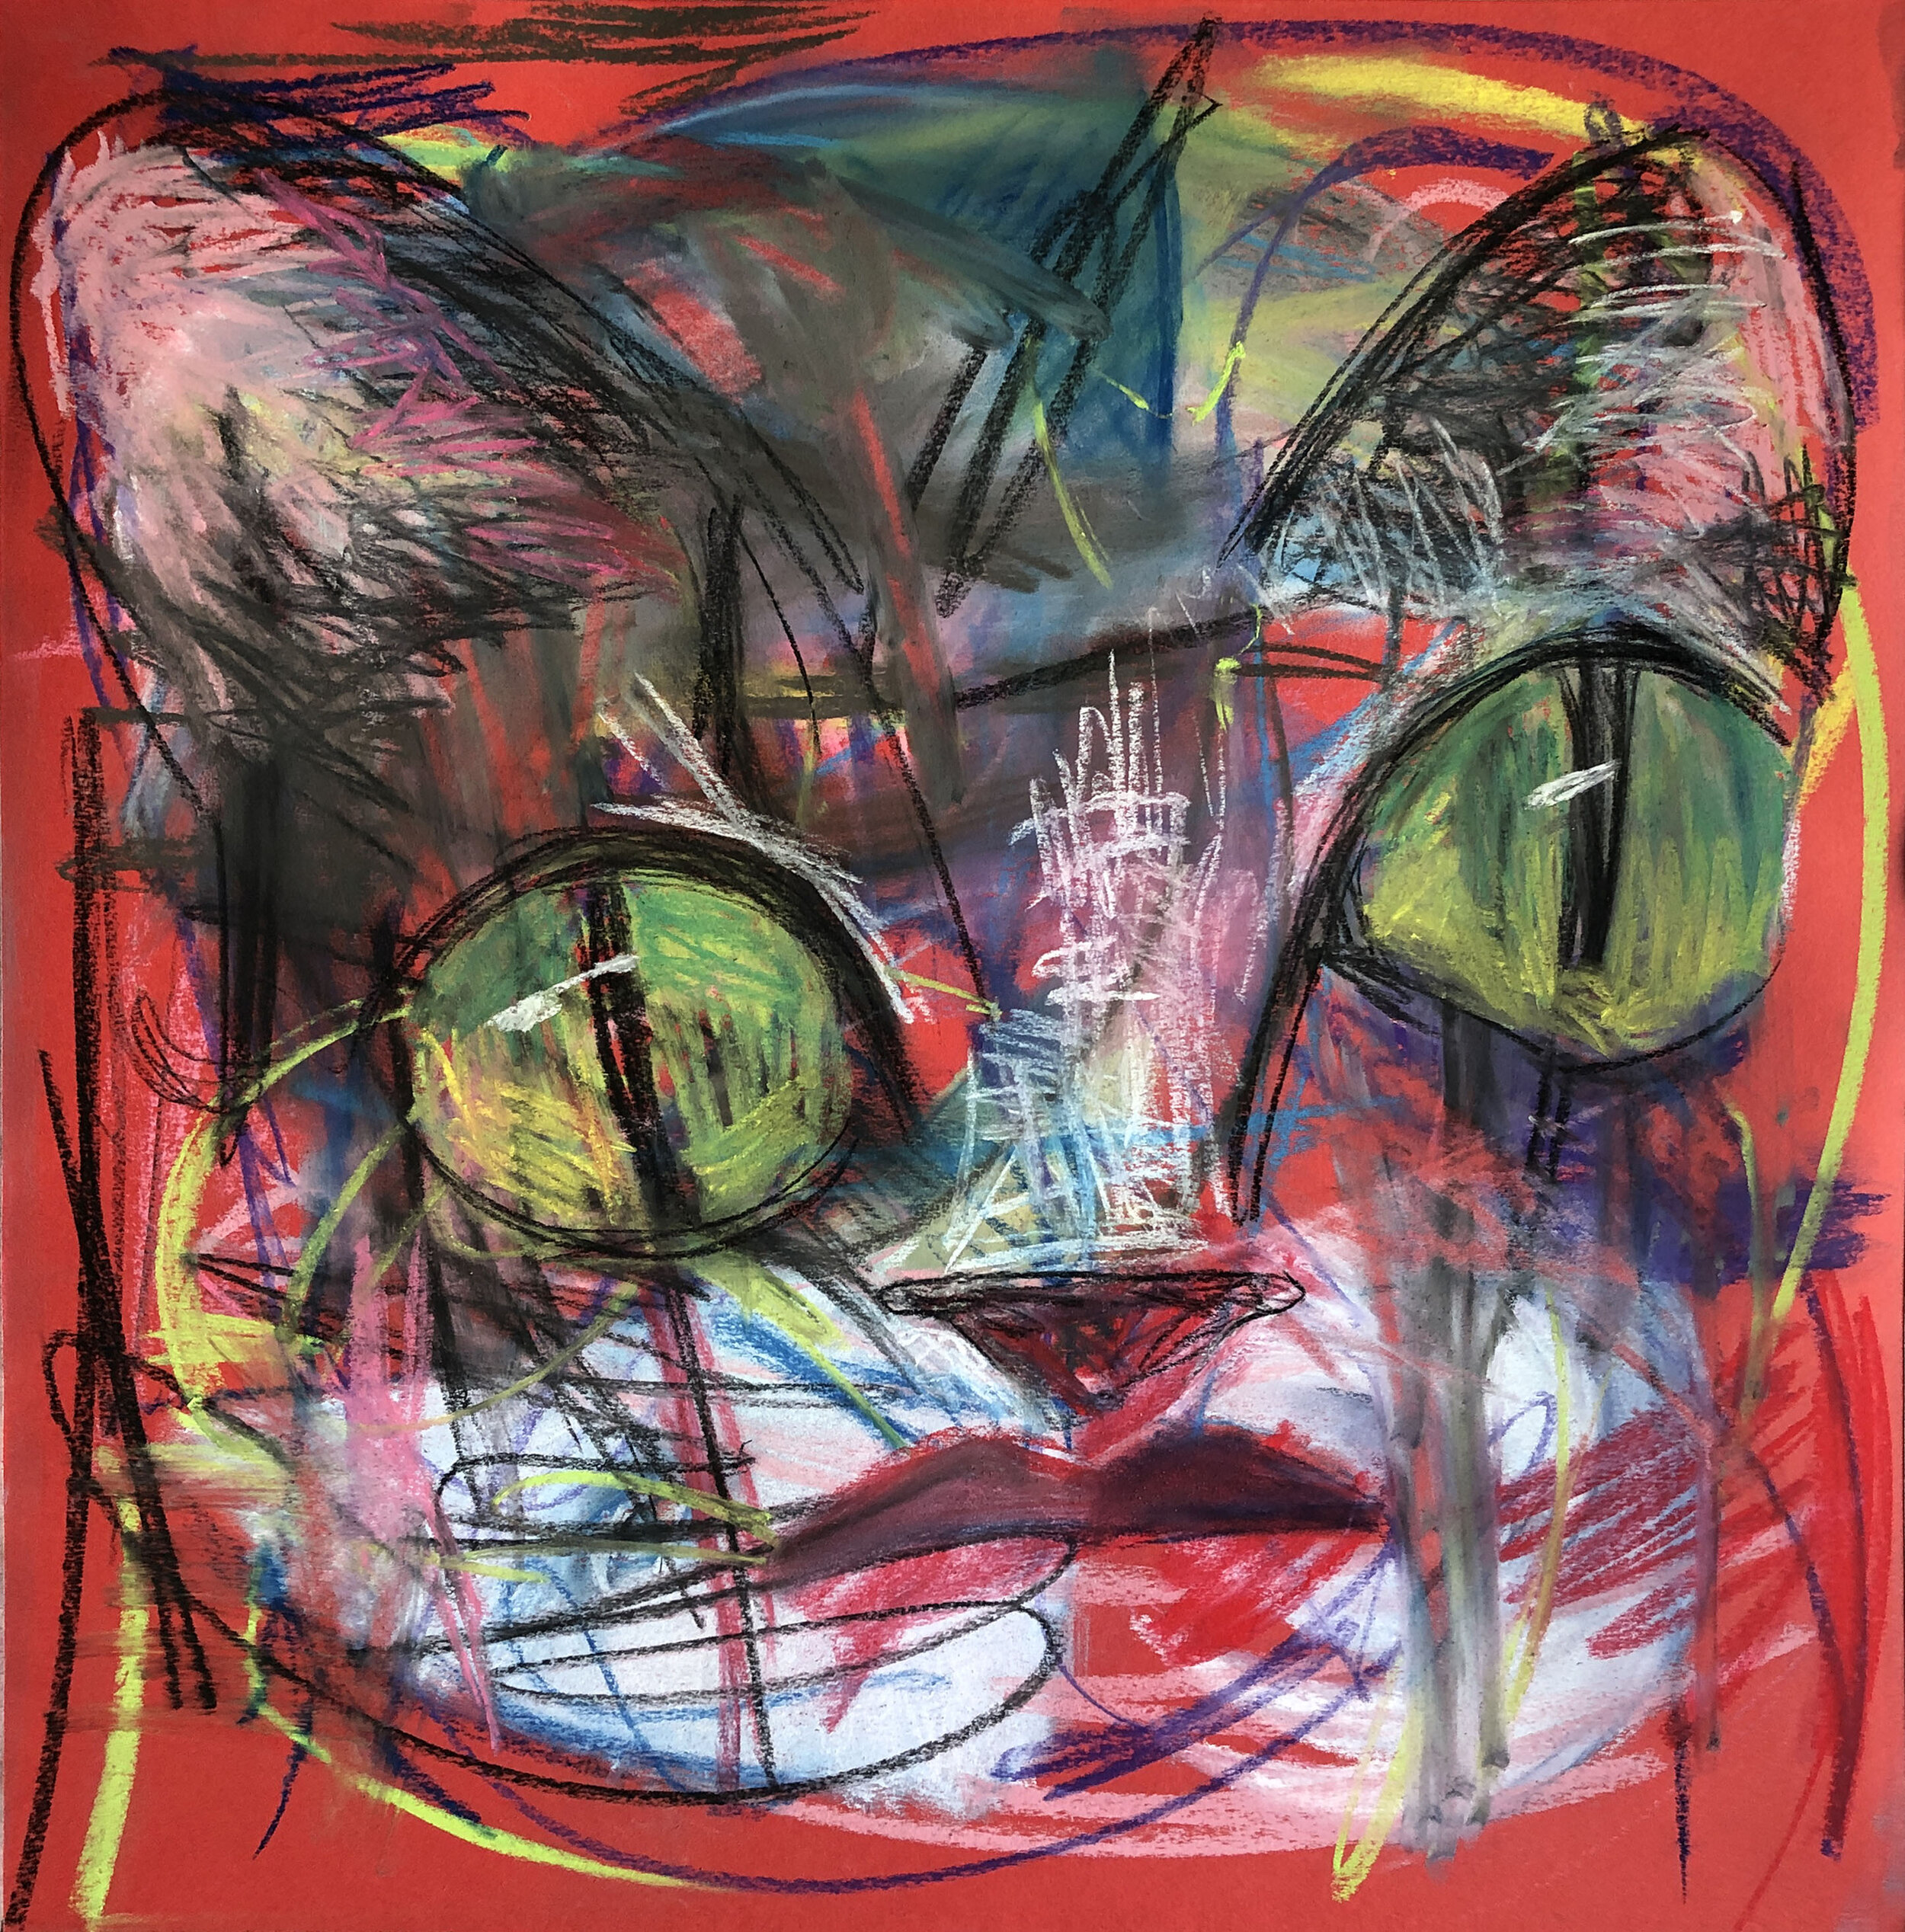 "Queen Pussy Cat" 2020 19.5" x 19.5" Pastel on colored paper